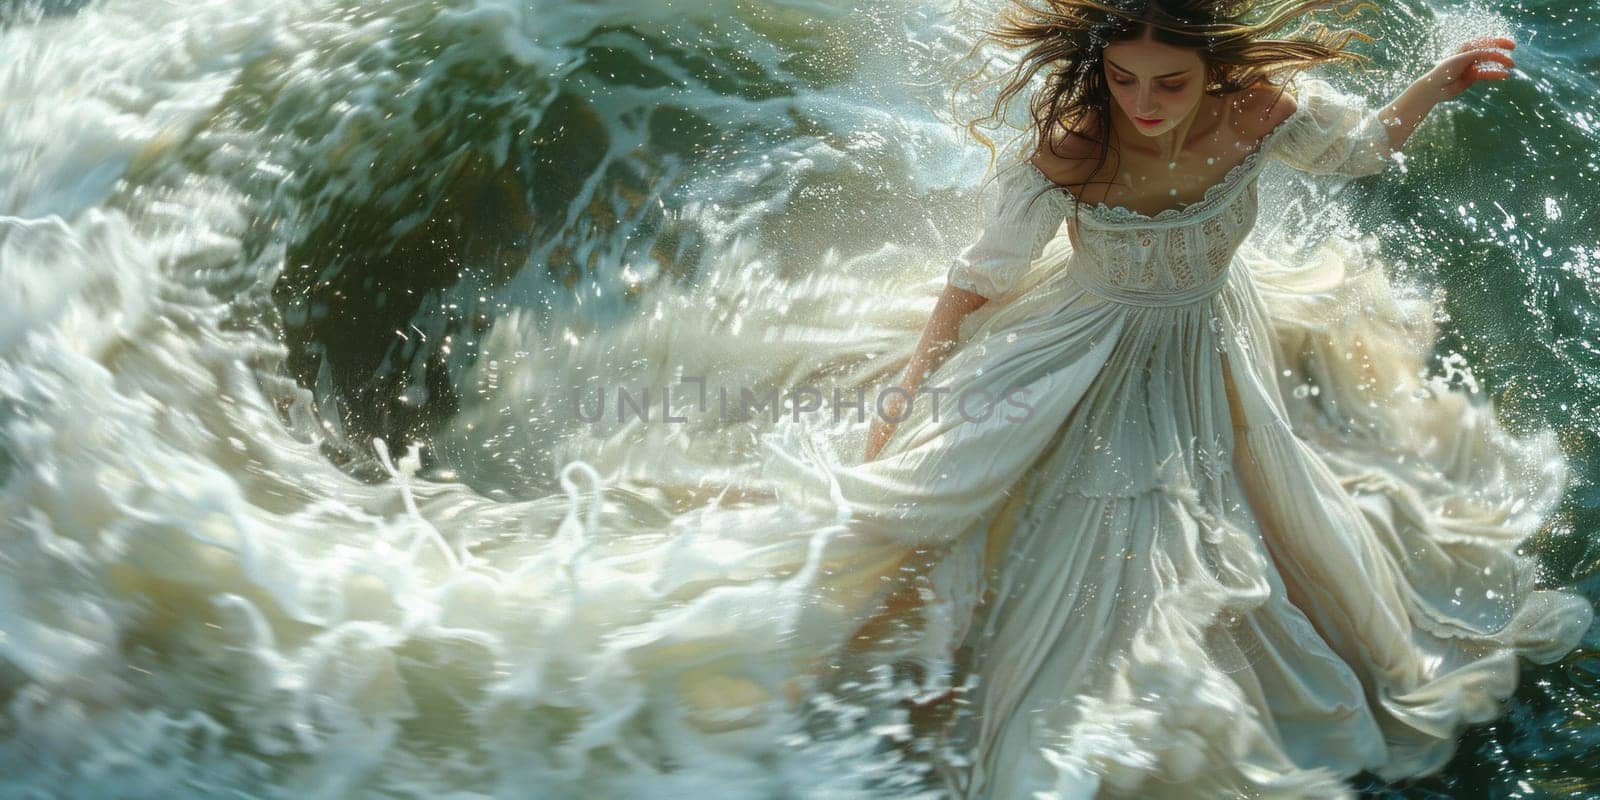 A breathtaking painting of a woman in a flowing dress, standing gracefully amidst a tranquil water setting, embodying serenity and elegance.